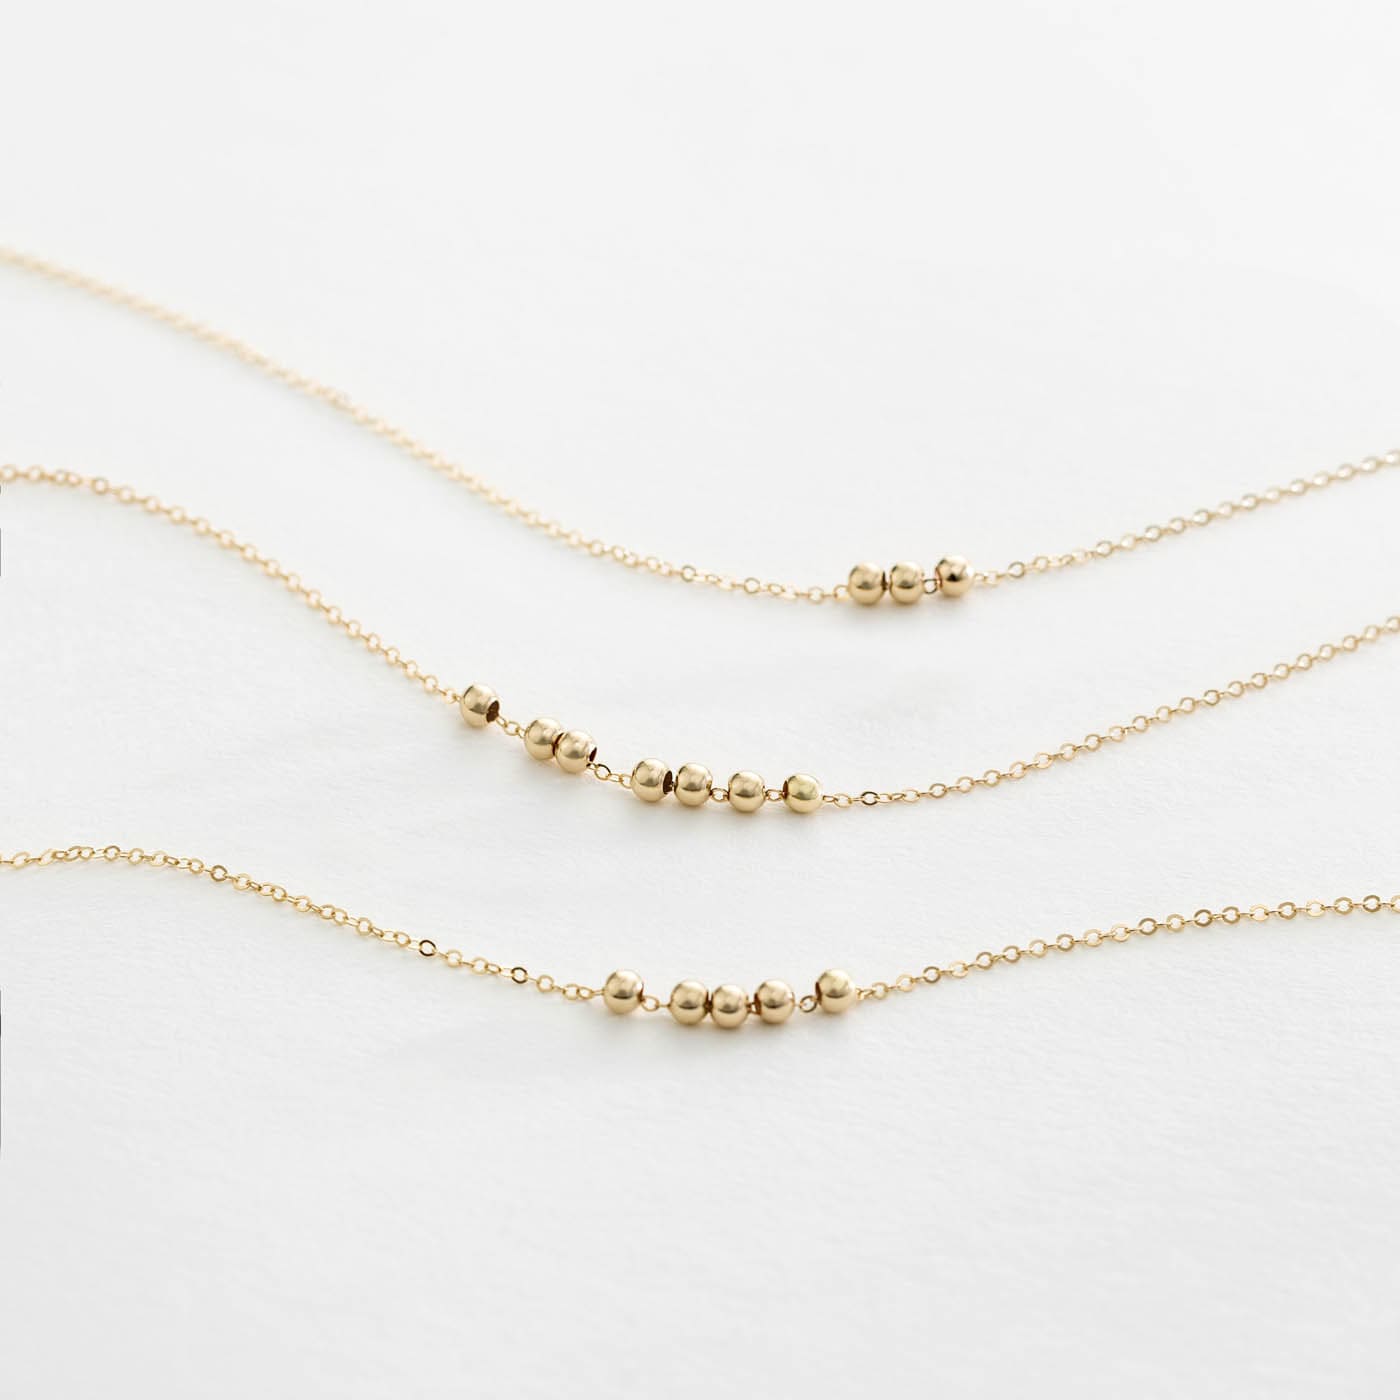 GLDN Friendship Beads Necklace 14K Gold Fill / 4 Beads